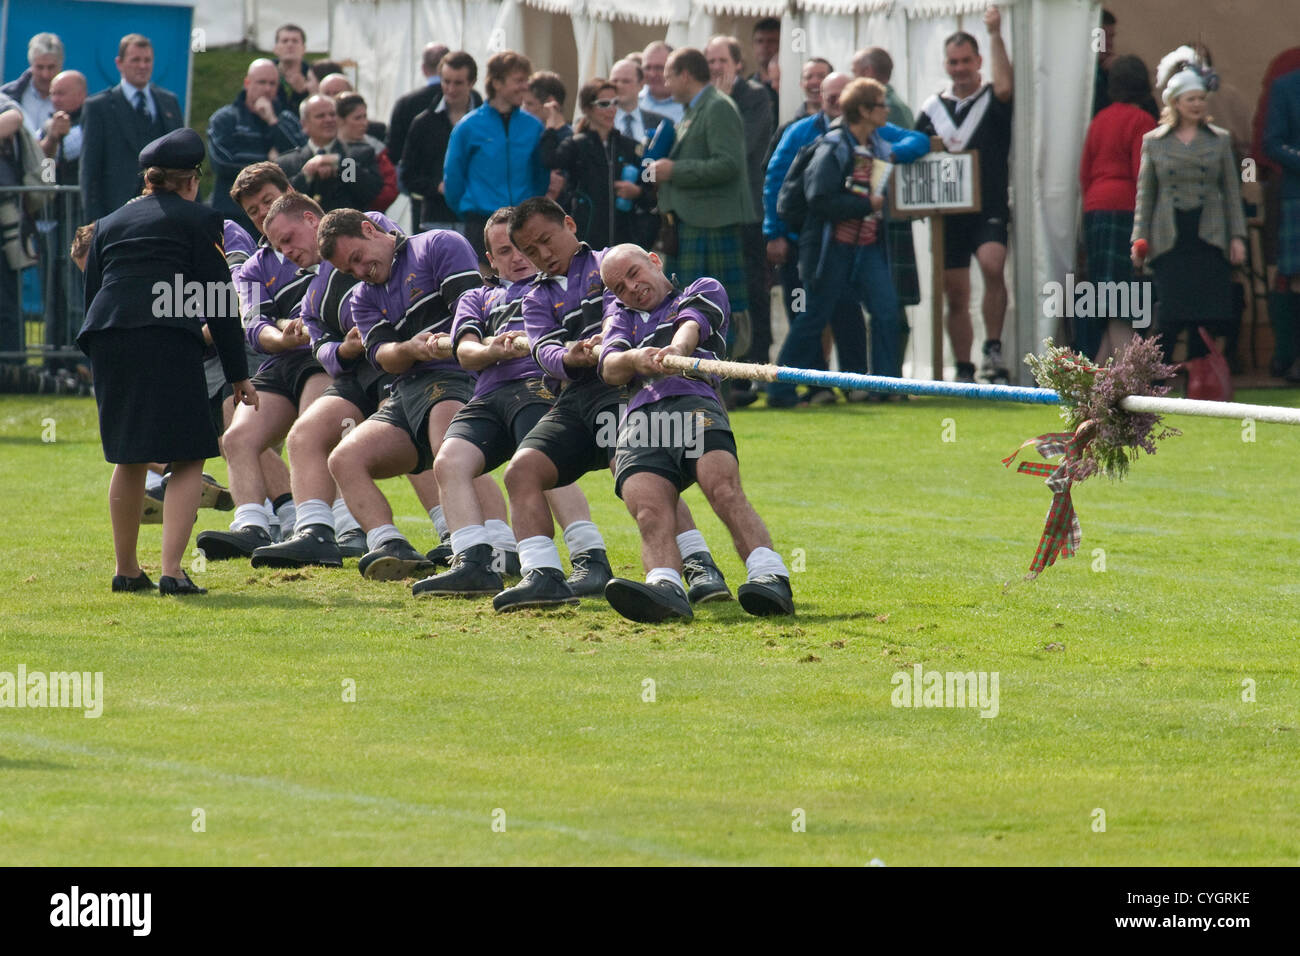 Team taking part in a 'Tug of War' event at a Scottish Highland Games Stock Photo